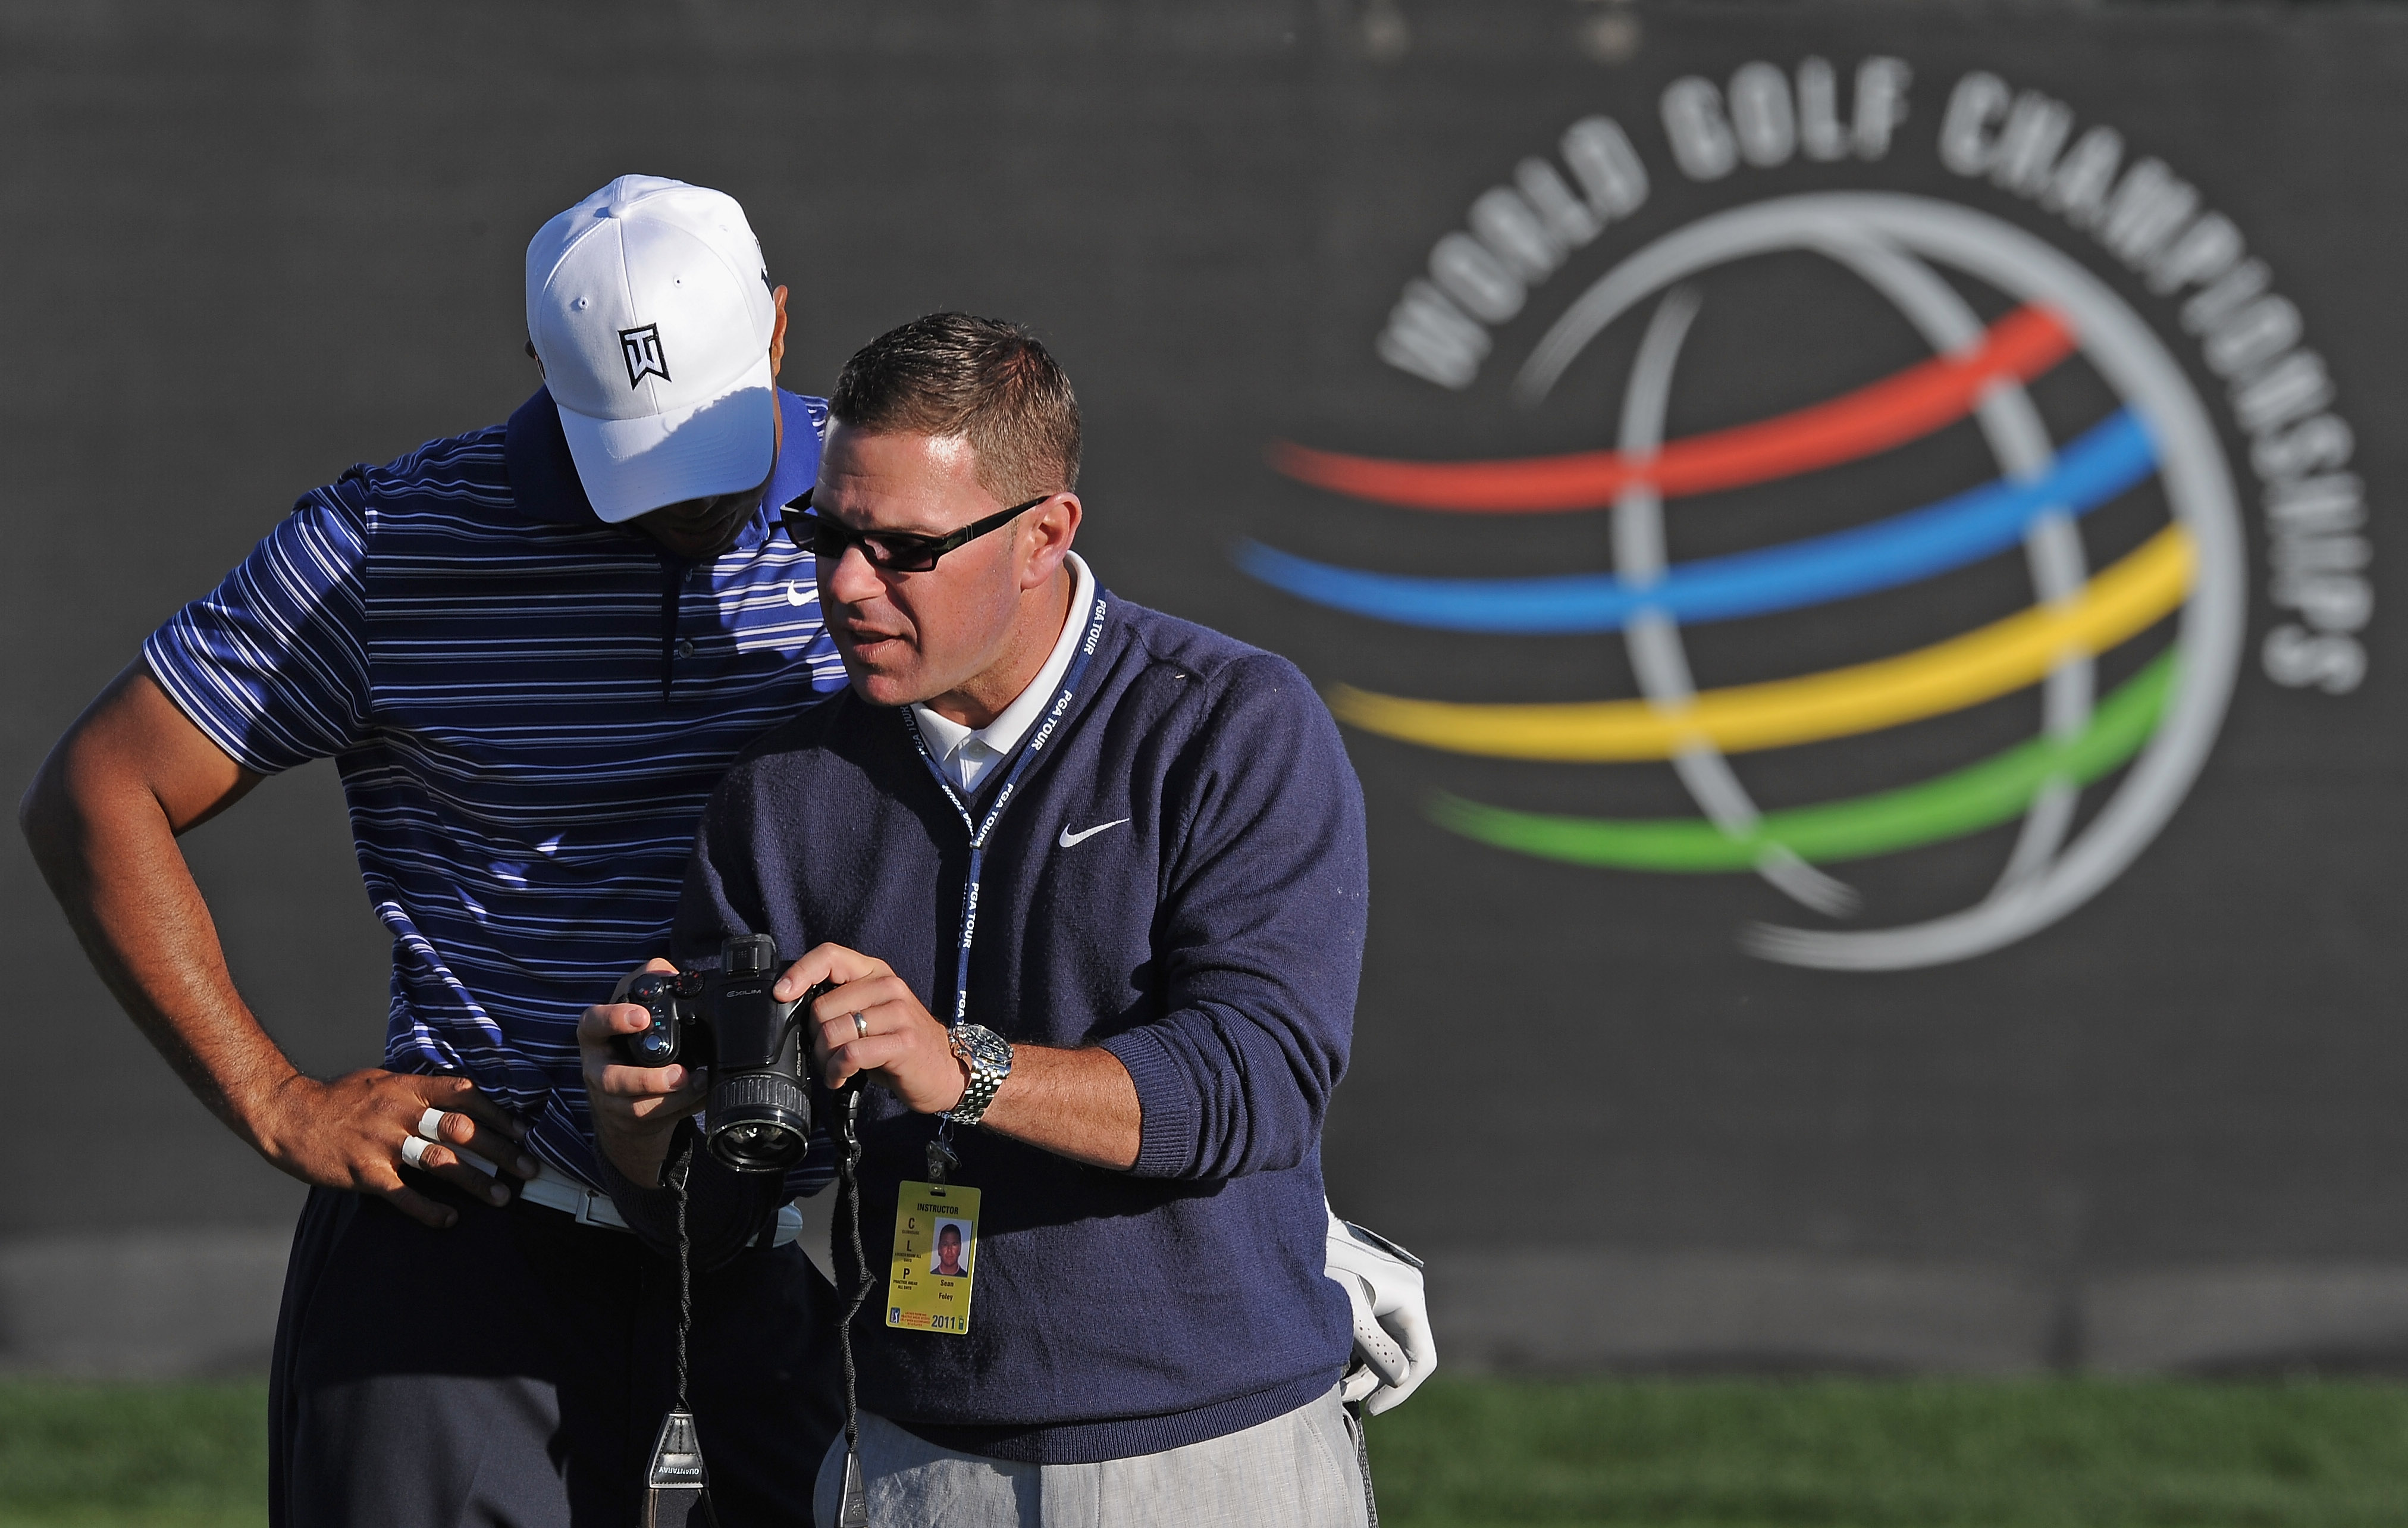 MARANA, AZ - FEBRUARY 22:  Tiger Woods  looks at a video with coach Sean Foley during practice prior to the start of the World Golf Championships-Accenture Match Play Championship held at The Ritz-Carlton Golf Club, Dove Mountain on February 22, 2011 in M